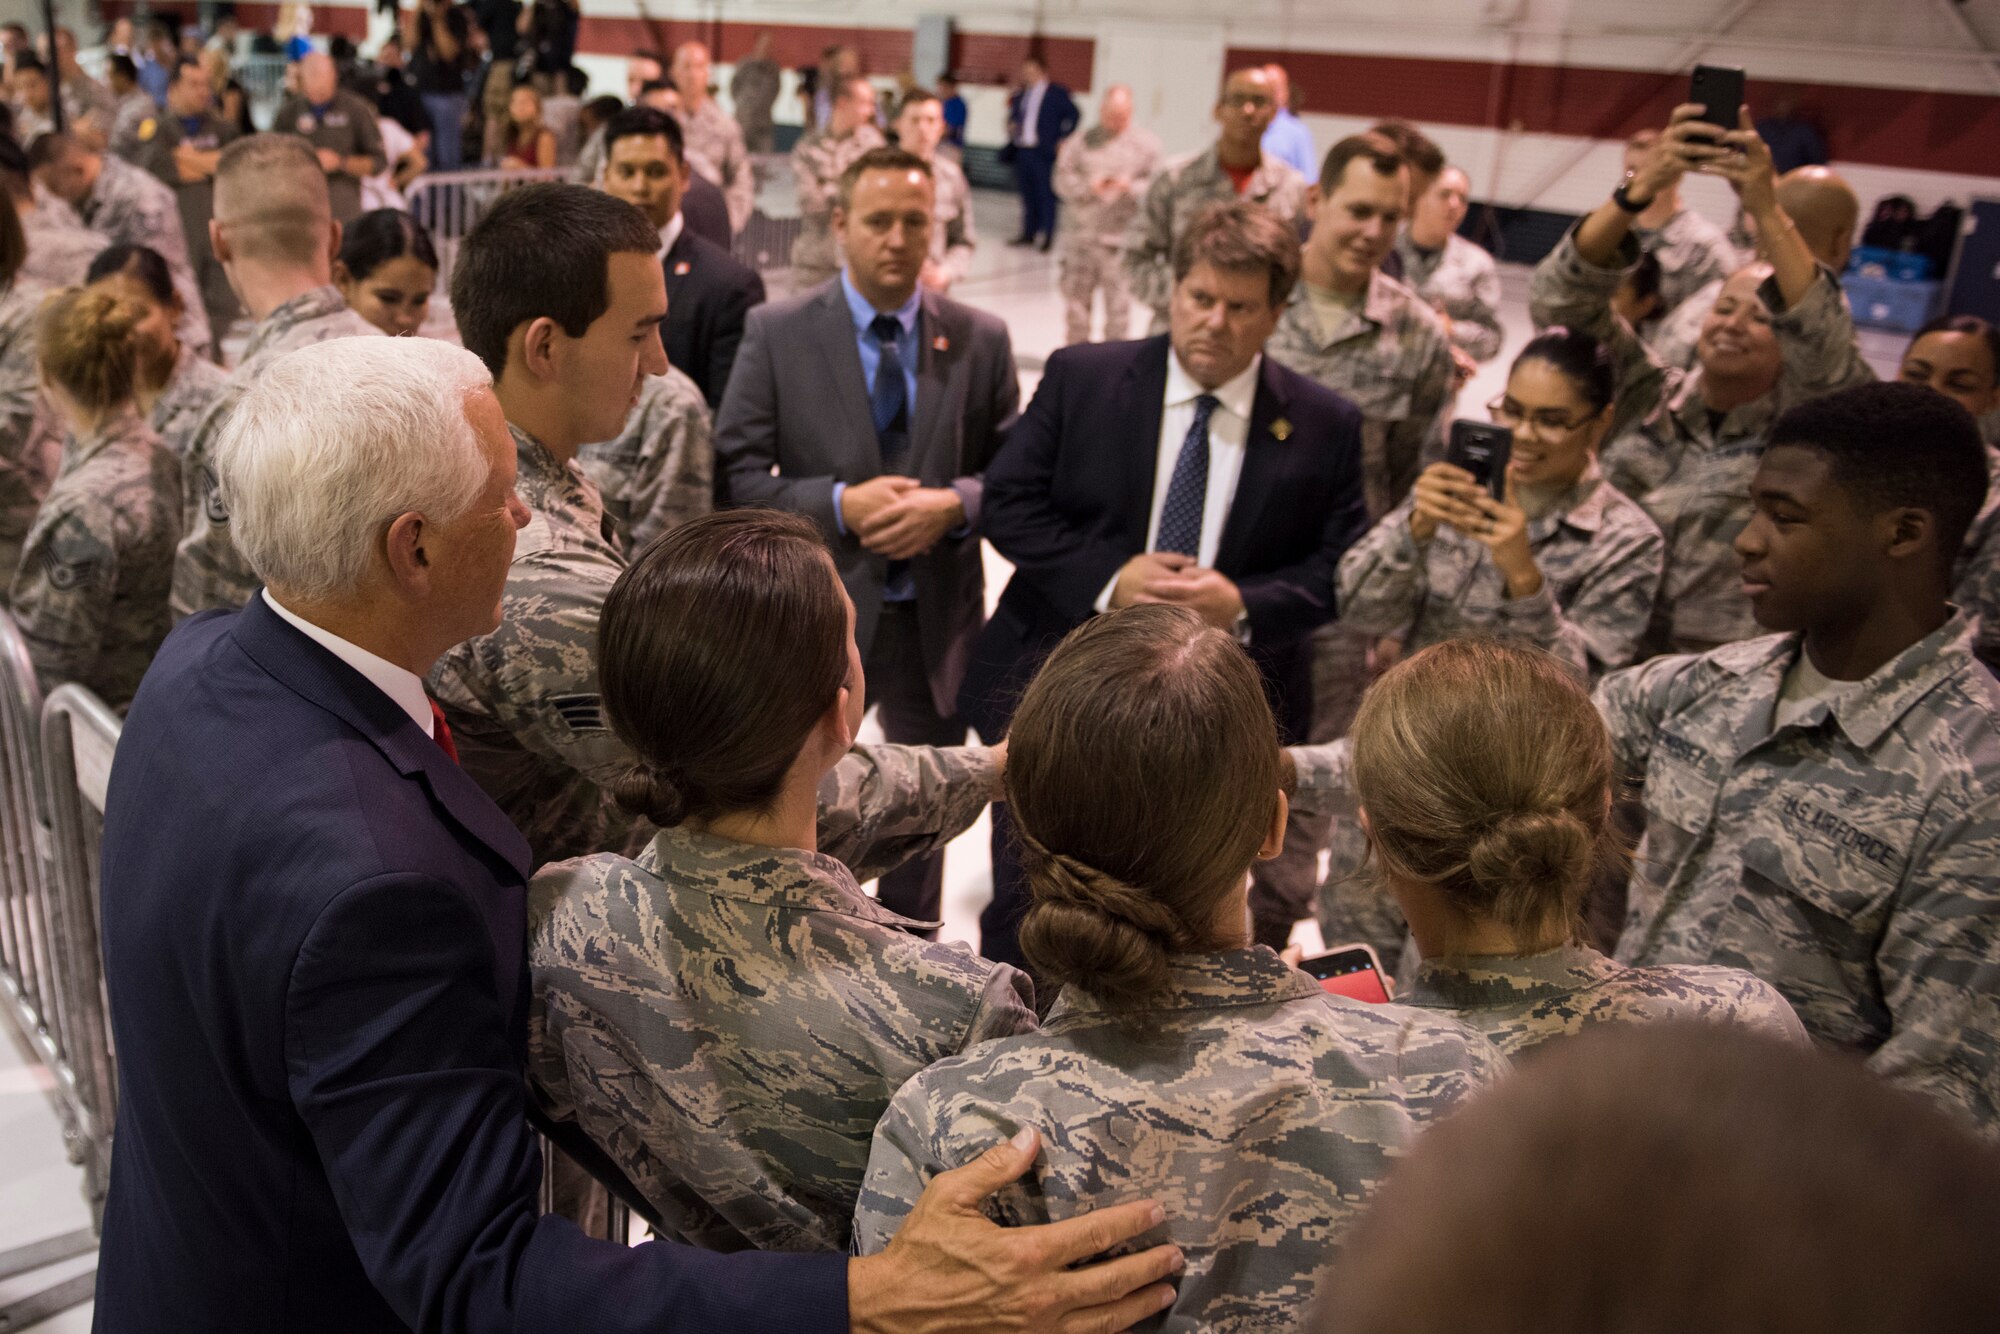 Vice President Mike Pence greets Airmen during a morale visit to Nellis Air Force Base, Nevada, Sept. 7, 2018. Pence visited the base in January and returned for another firsthand look at the world’s premier proving ground for air, space and cyberspace lethality. (U.S. Air Force photo by Airman 1st Class Andrew D. Sarver)